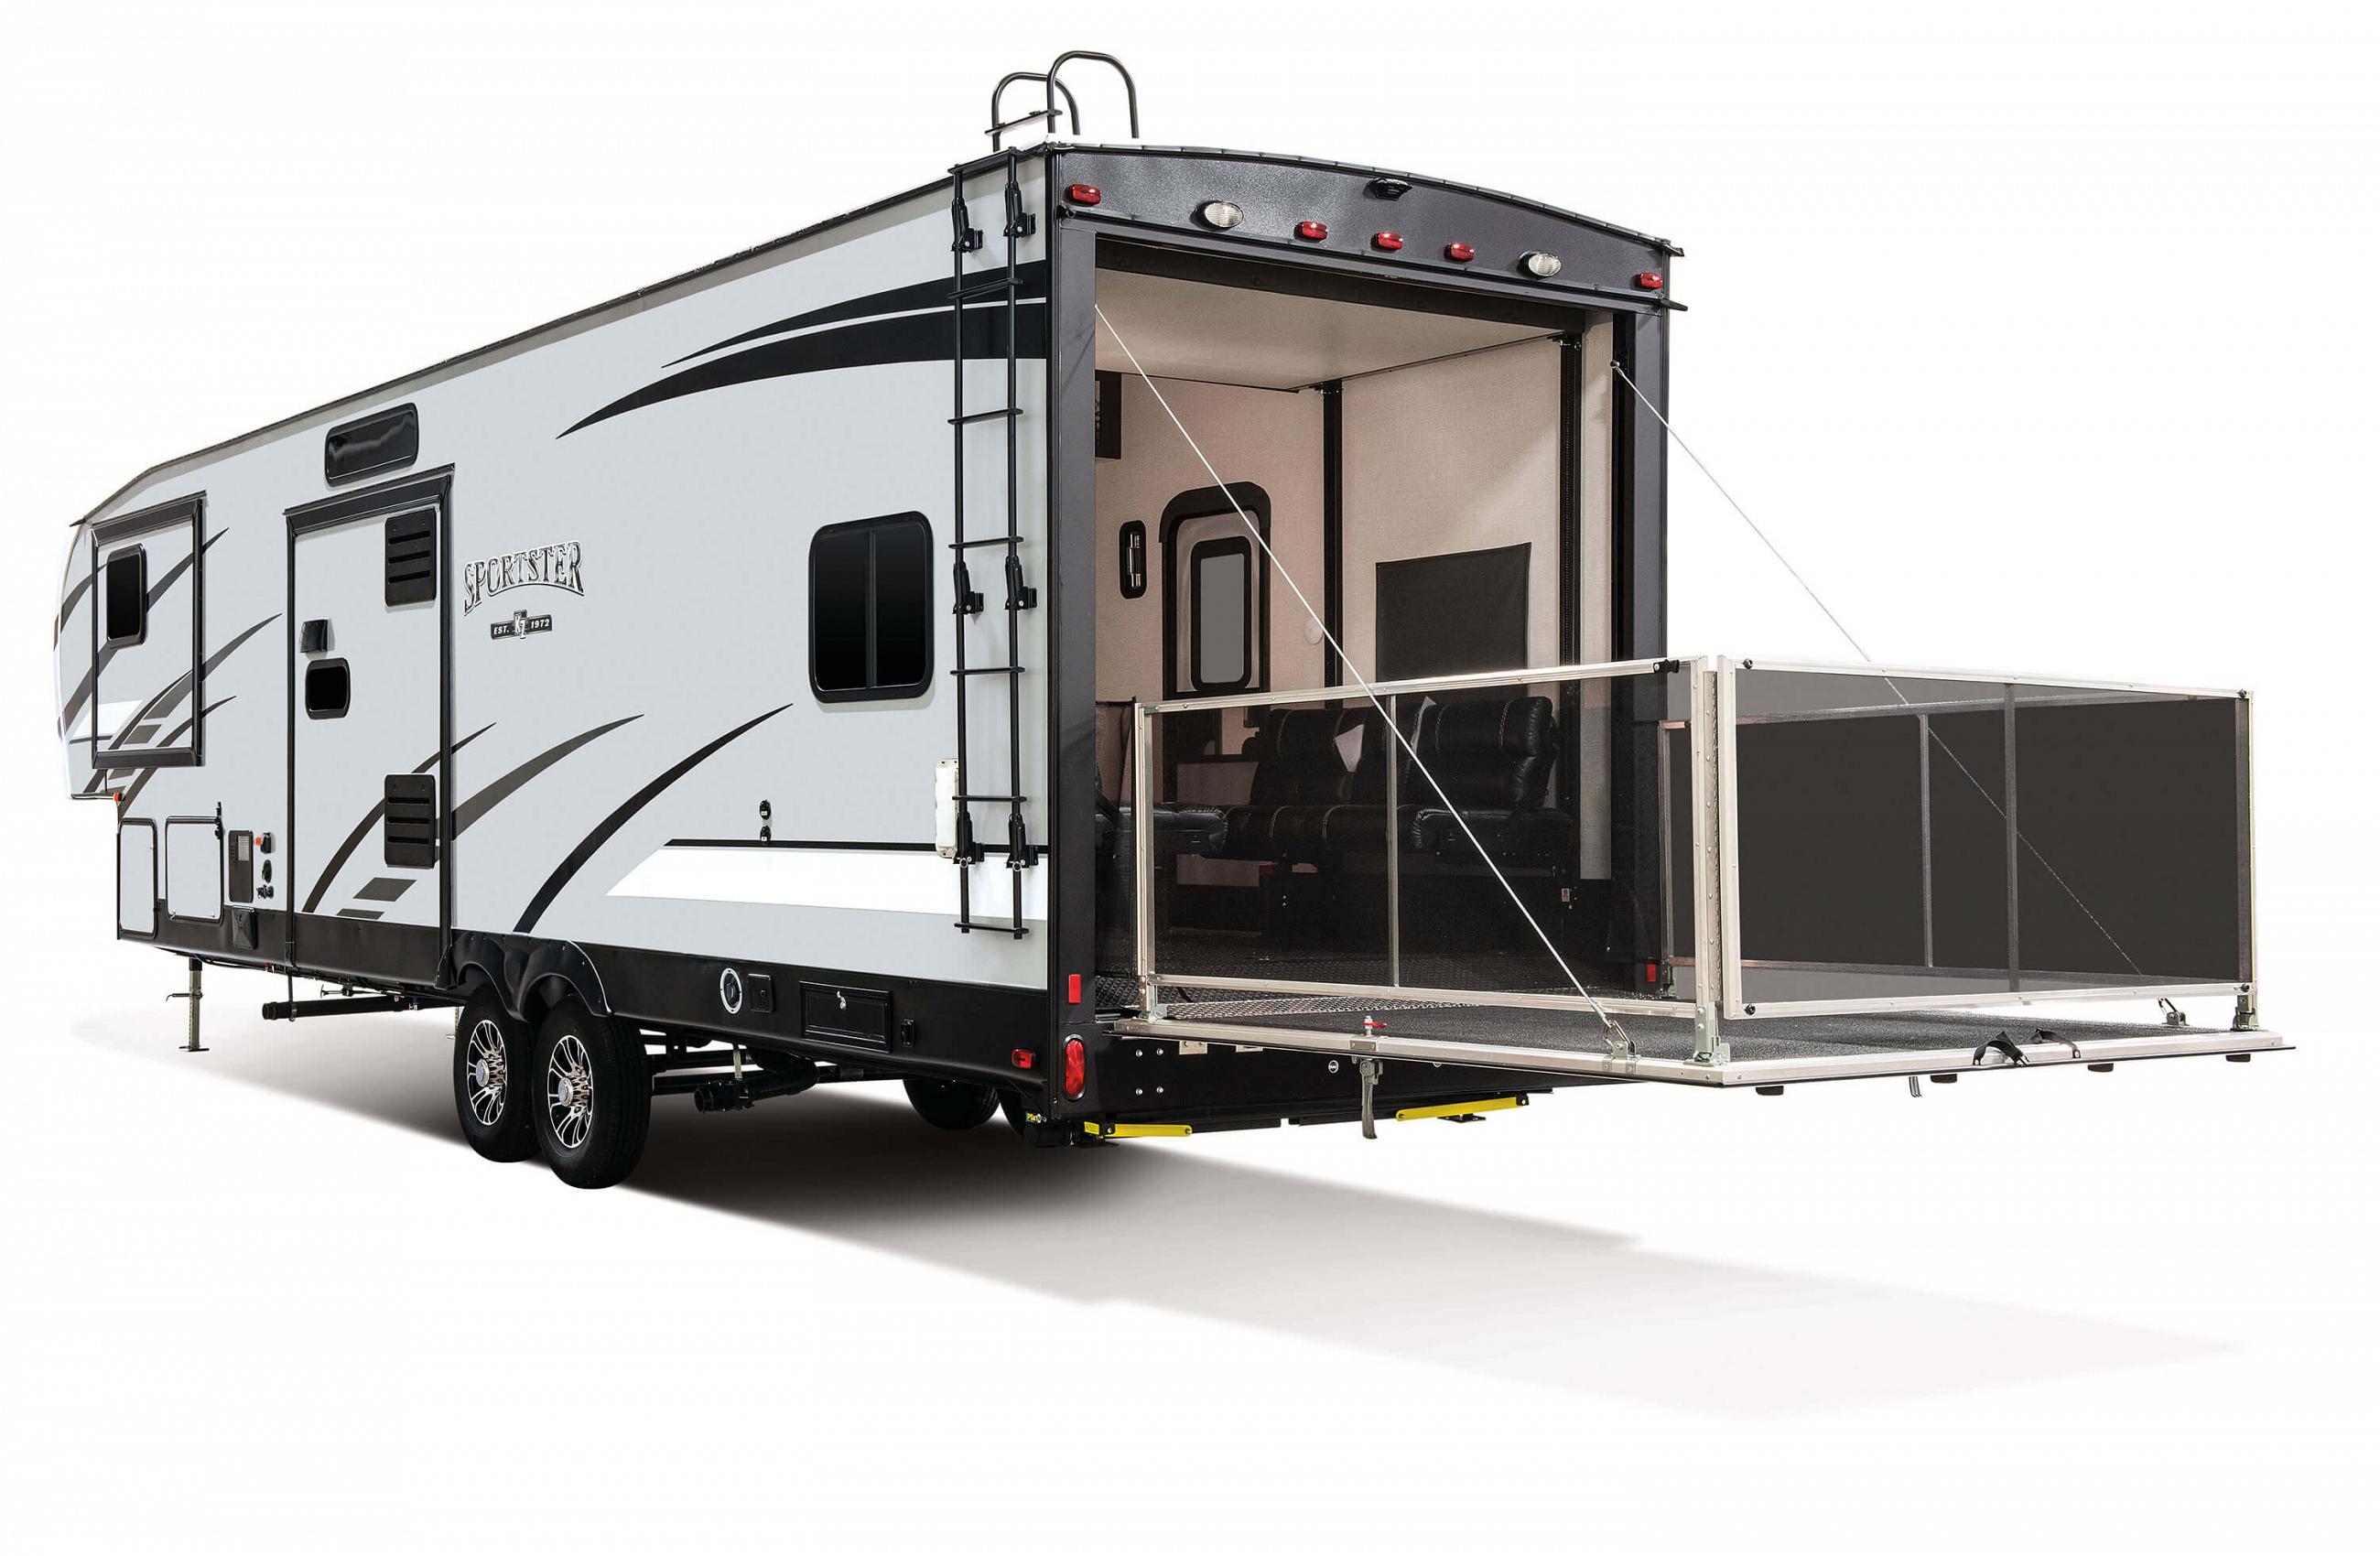 2020 KZ RV Sportster 343TH11 Fifth Wheel Toy Hauler Exterior Patio Large 